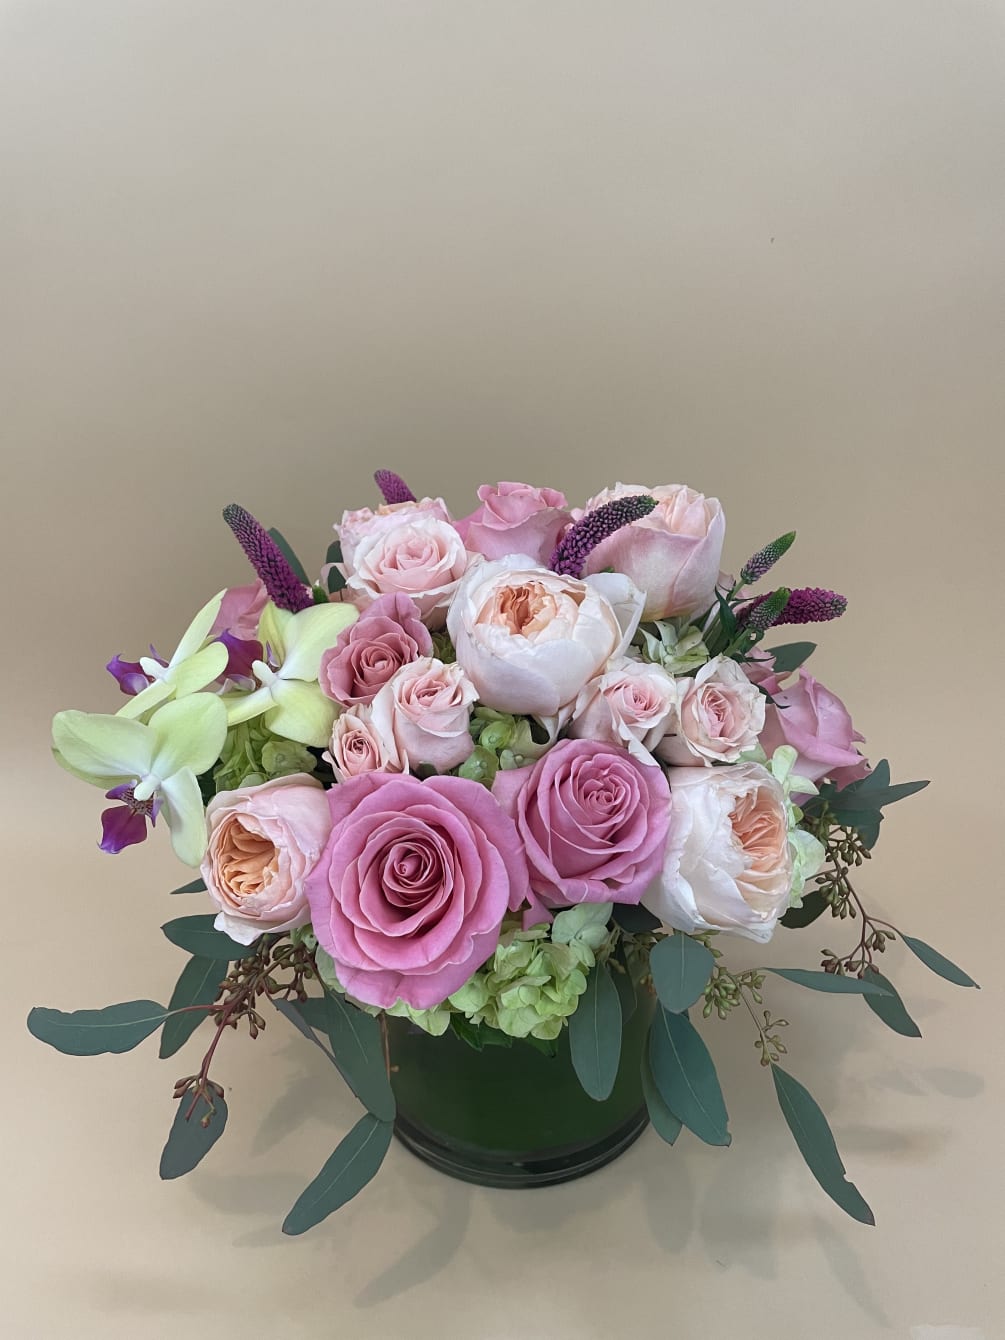 Truly stunning arrangement of our finest Pastels Blossoms.